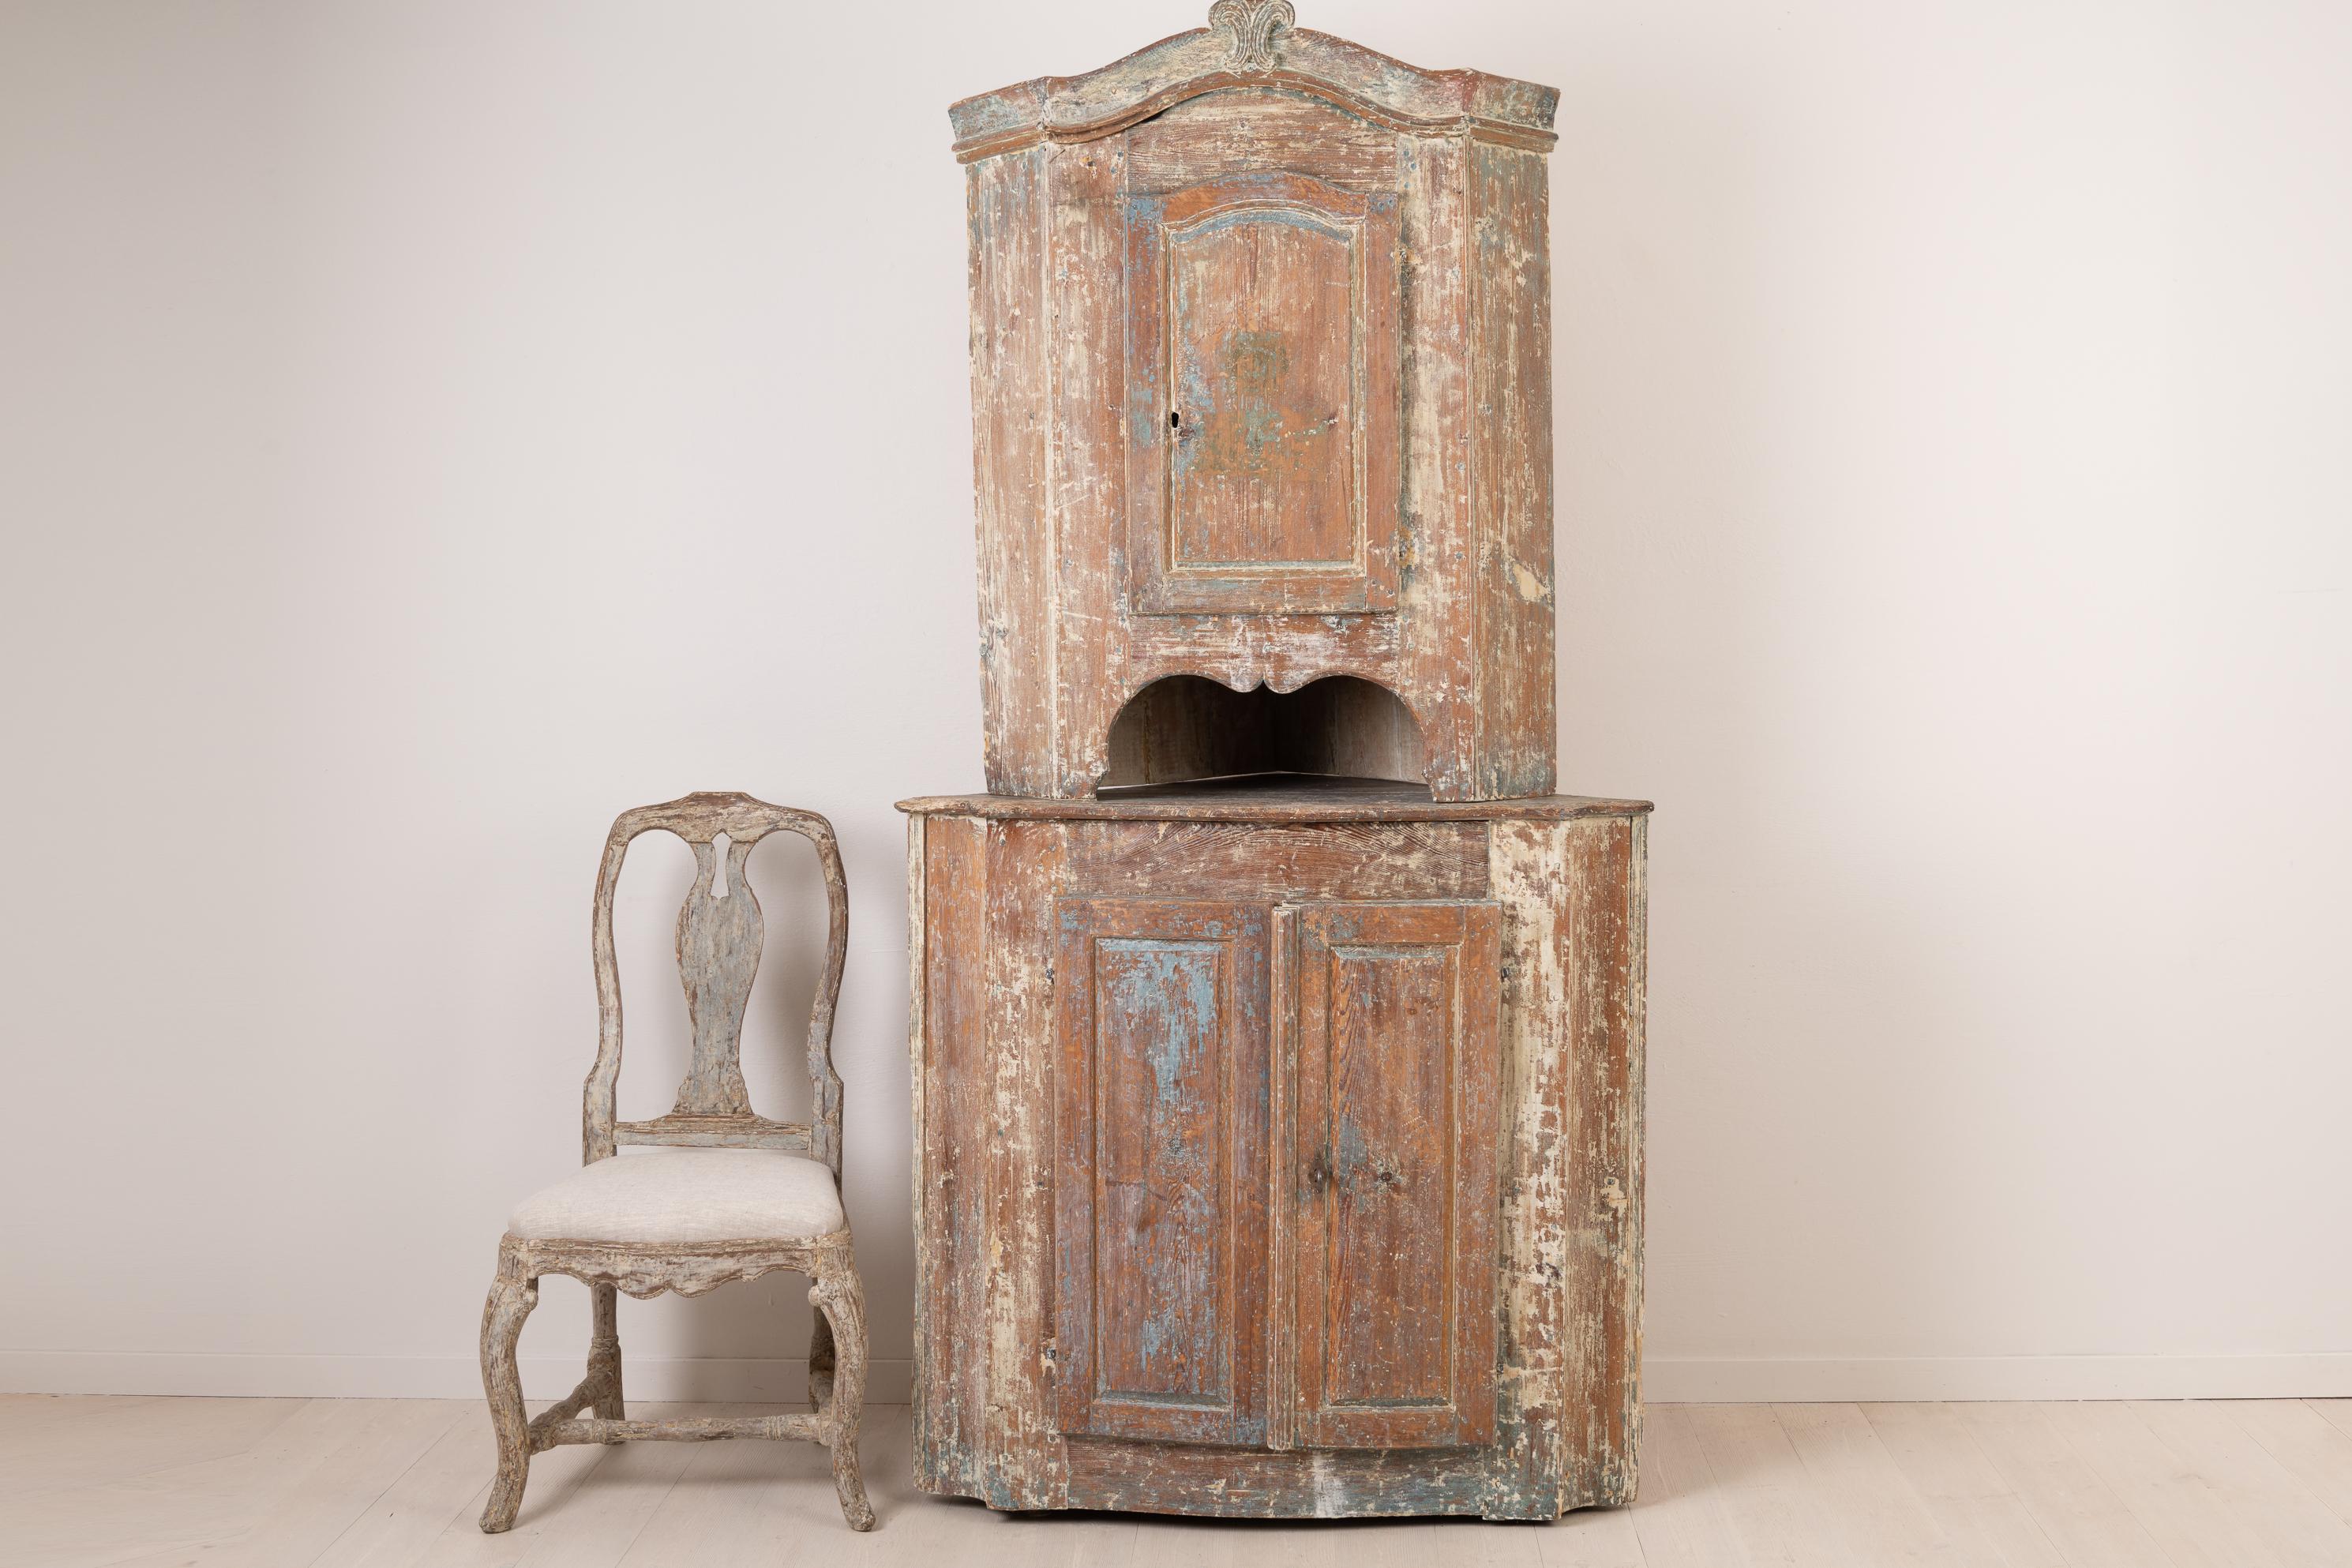 Northern Swedish rococo corner cabinet in painted pine. The cabinet is made circa 1770 in two parts, an upper and lower cabinet. As a natural product of 250 years of use the cabinet has a rustic patina and some traces of the original blue paint.